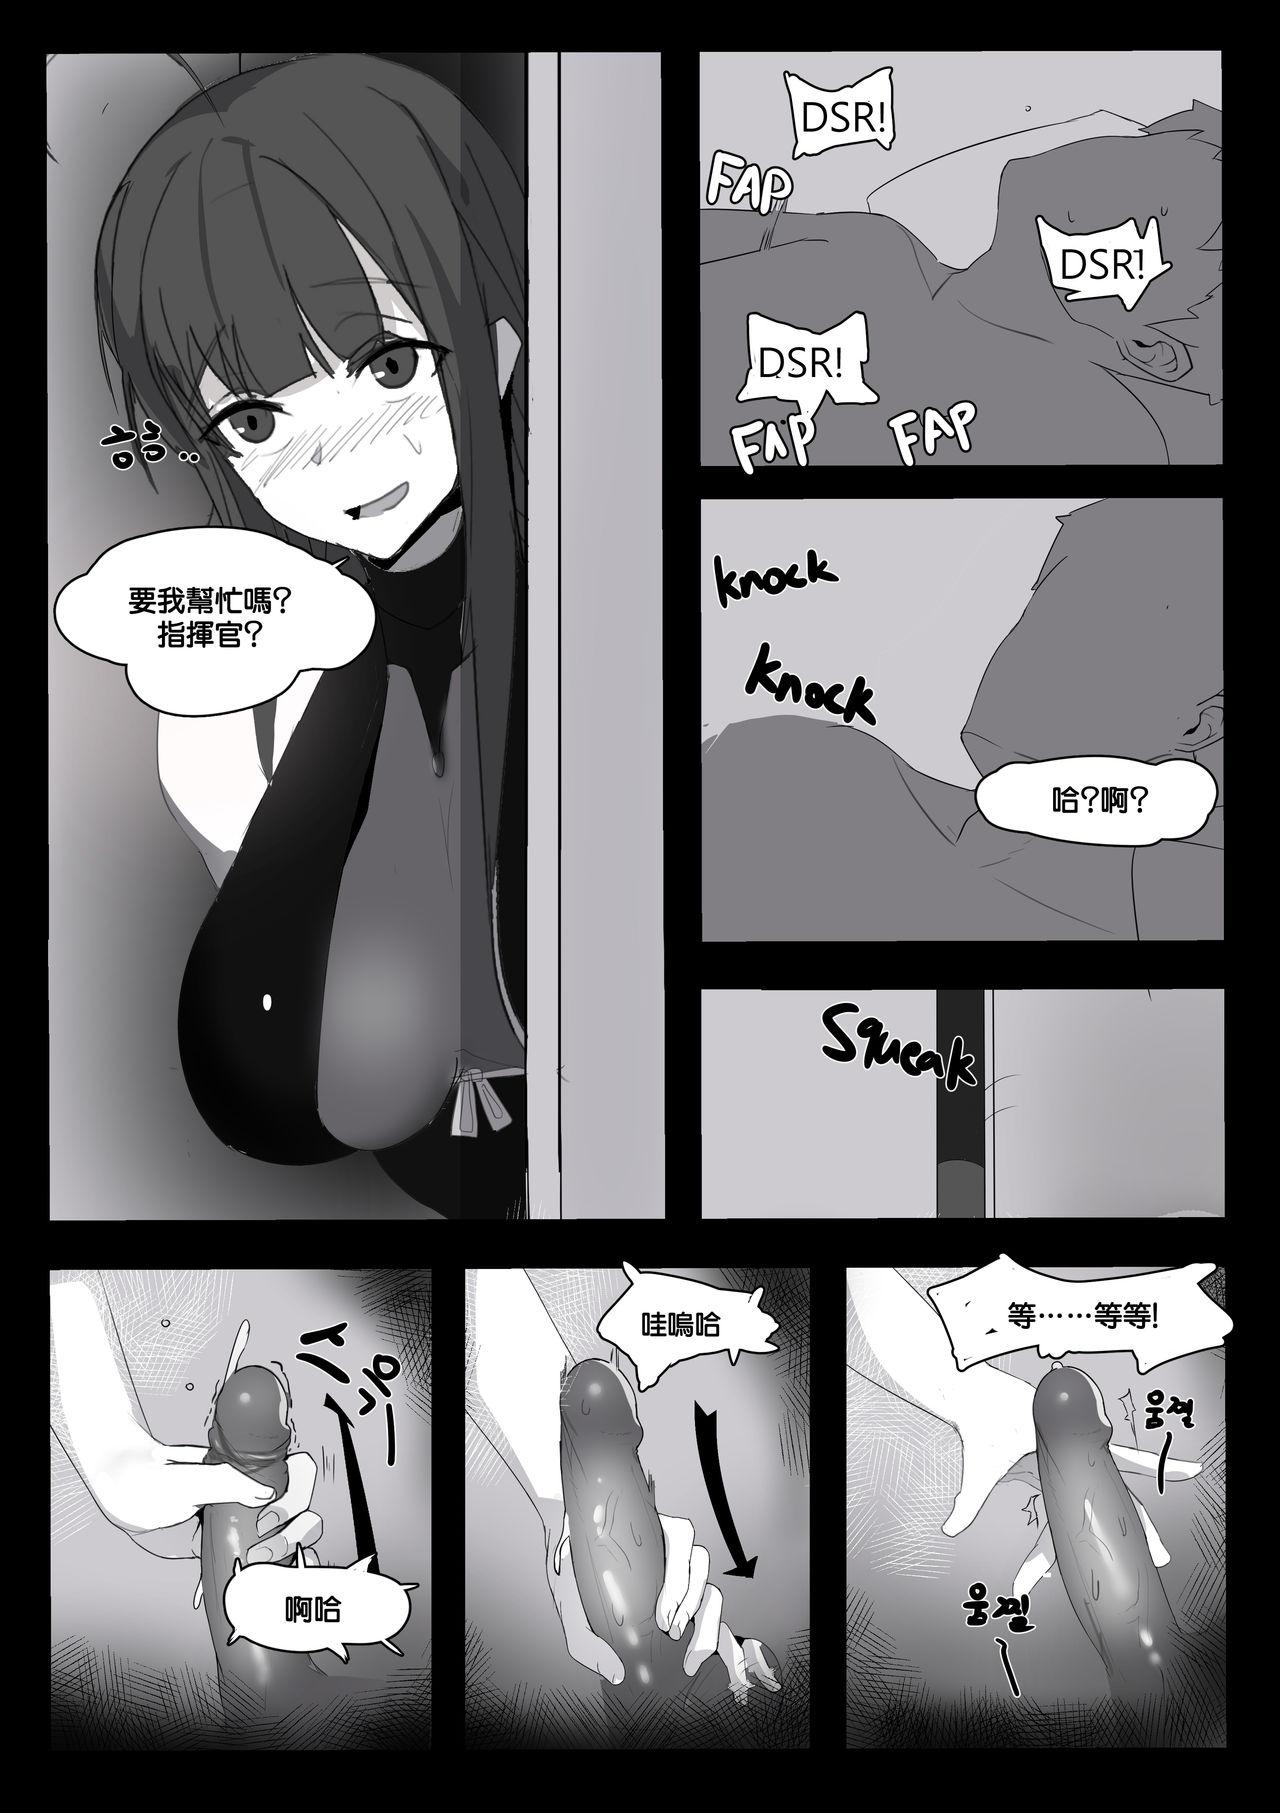 Young August 2018 - DSR Manga - Girls frontline Anus - Page 4